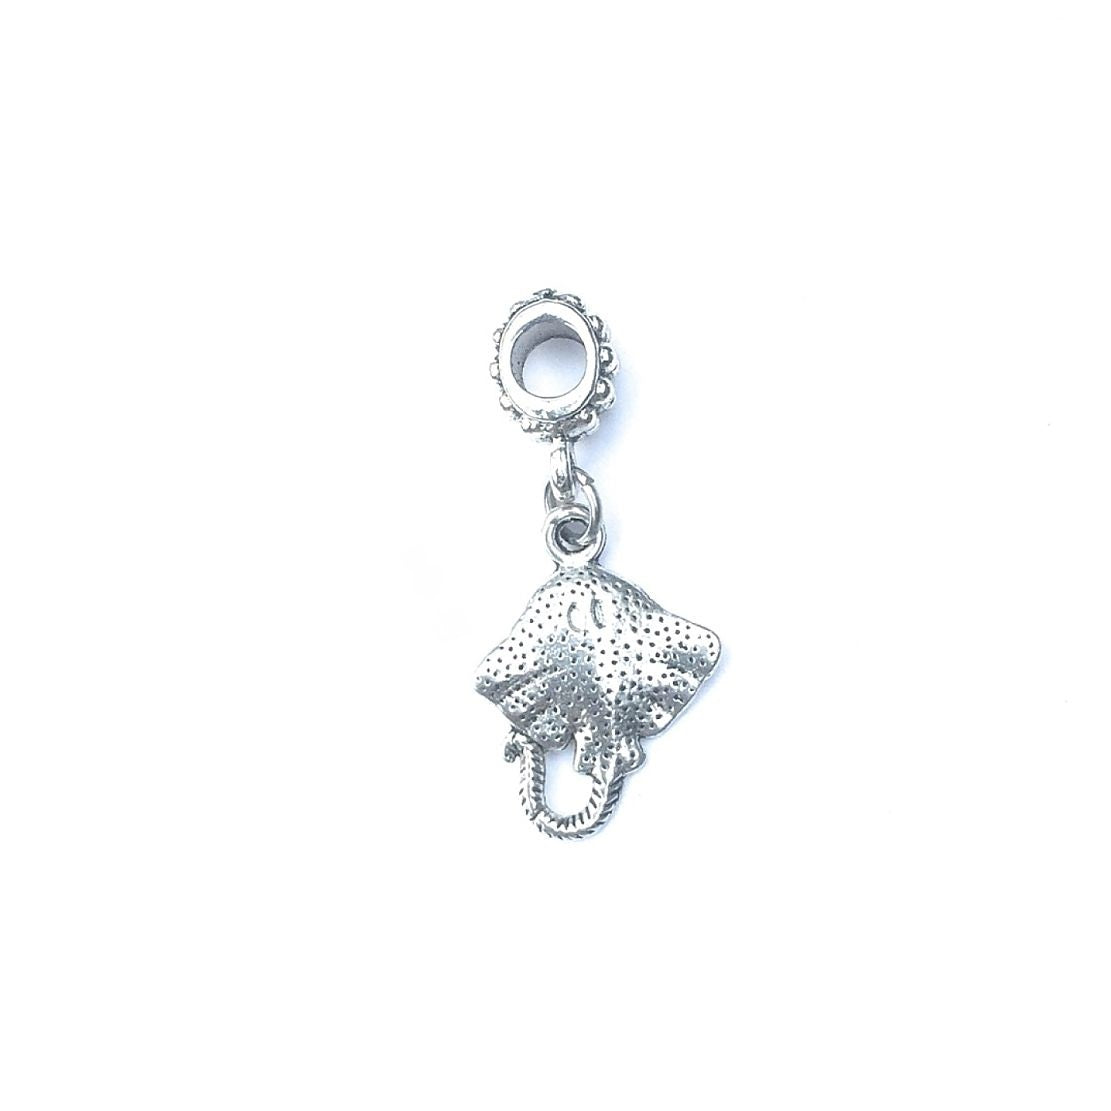 Handcrafted Silver Stingray Charm Bead for Bracelet.